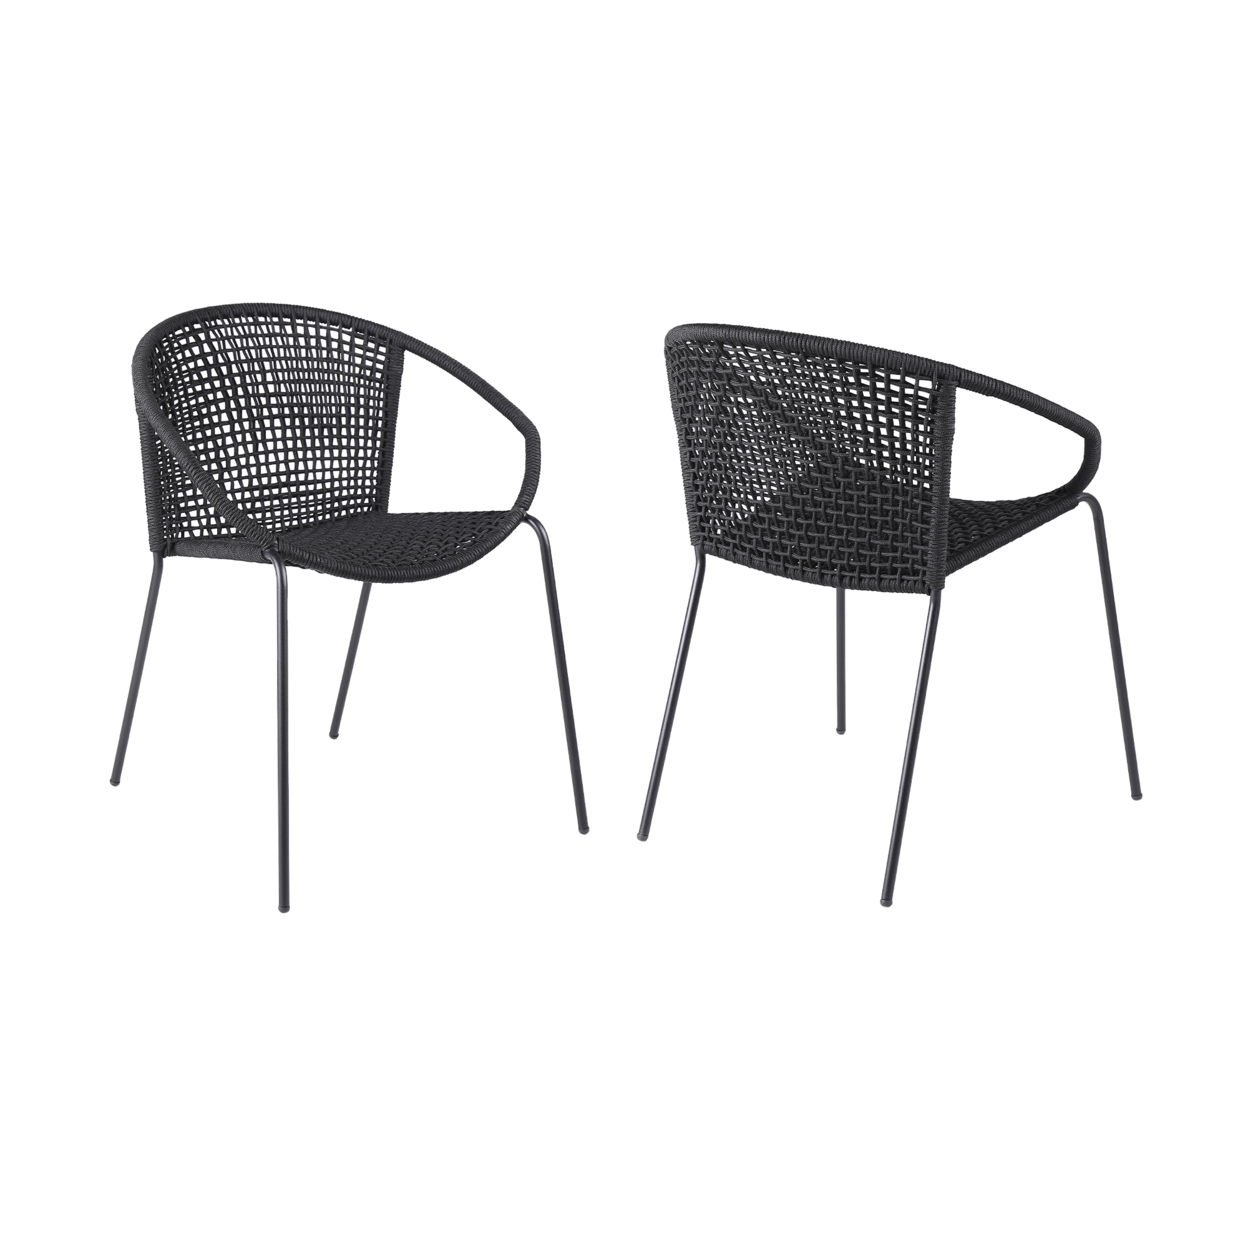 Dining Chair With Interwoven Geometric Seat And Back, Set Of 2, Black- Saltoro Sherpi